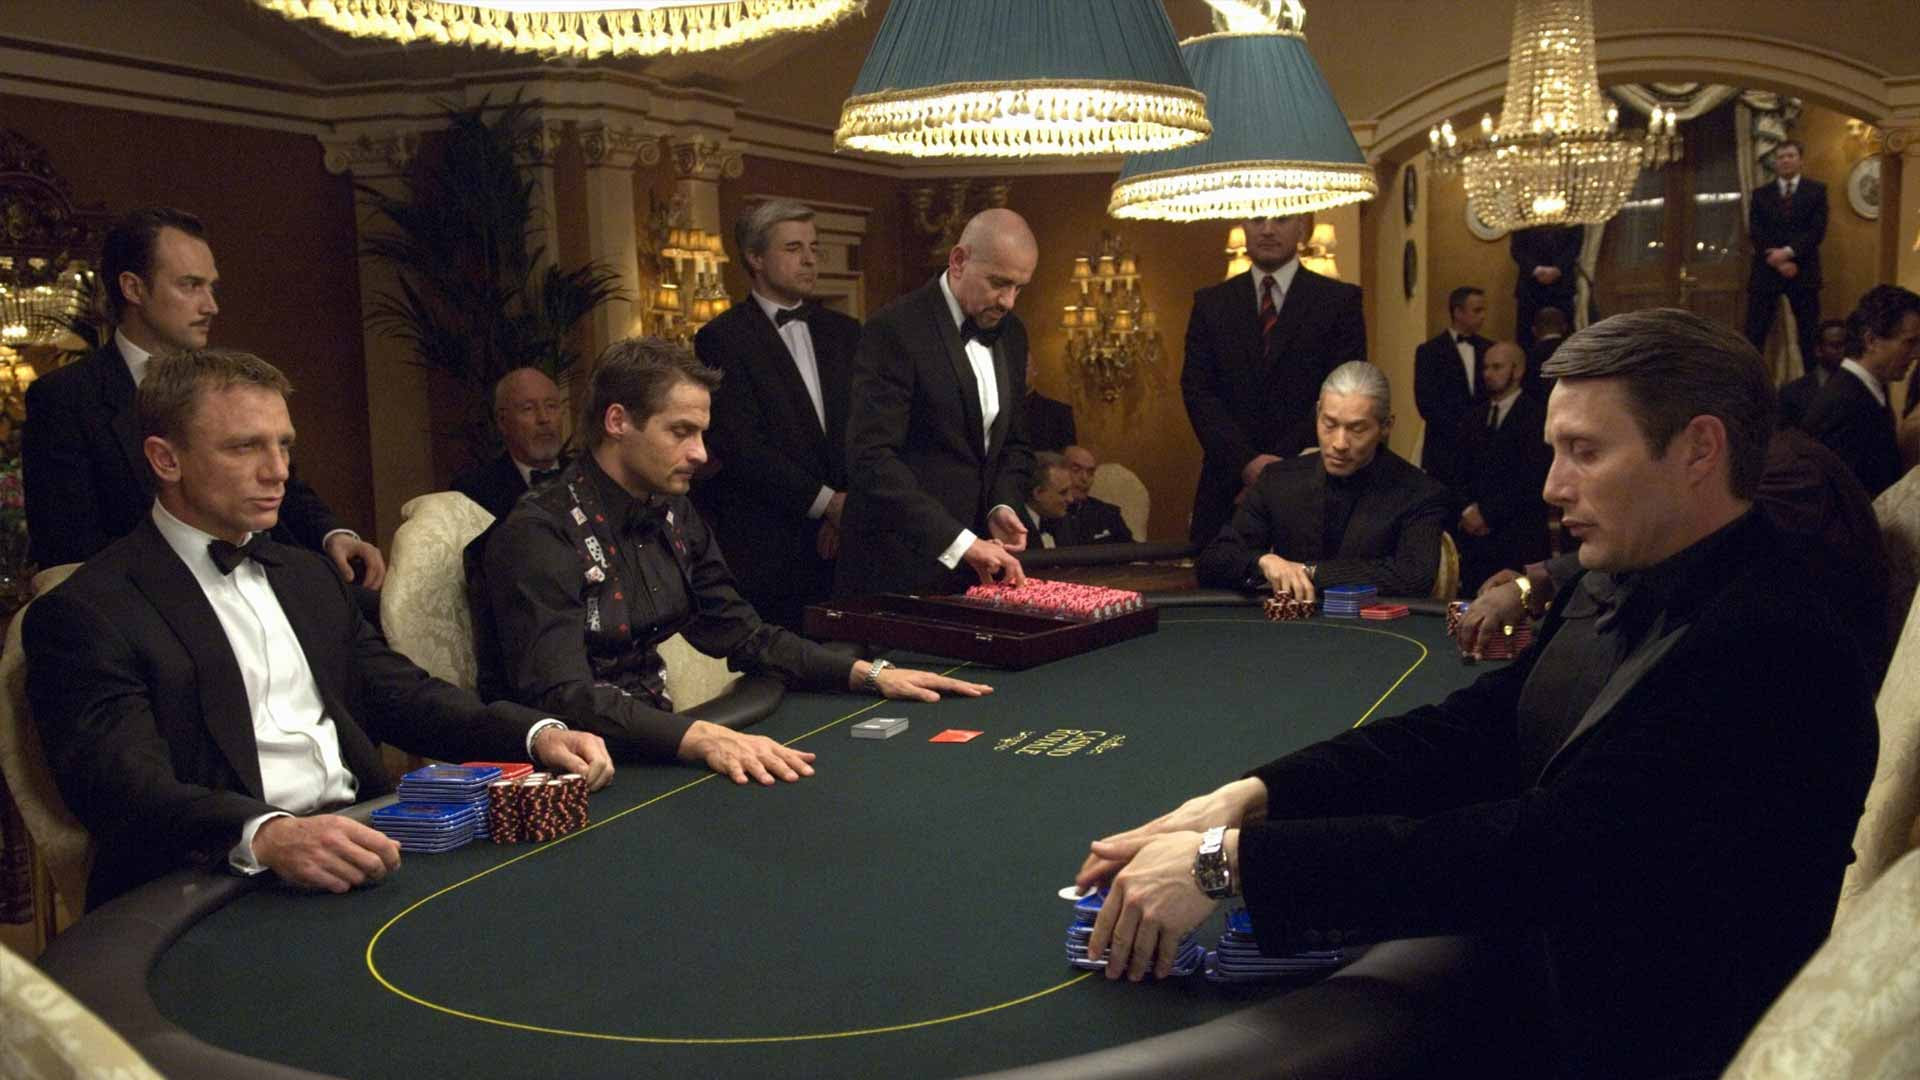 Casino Royale Drinking Game